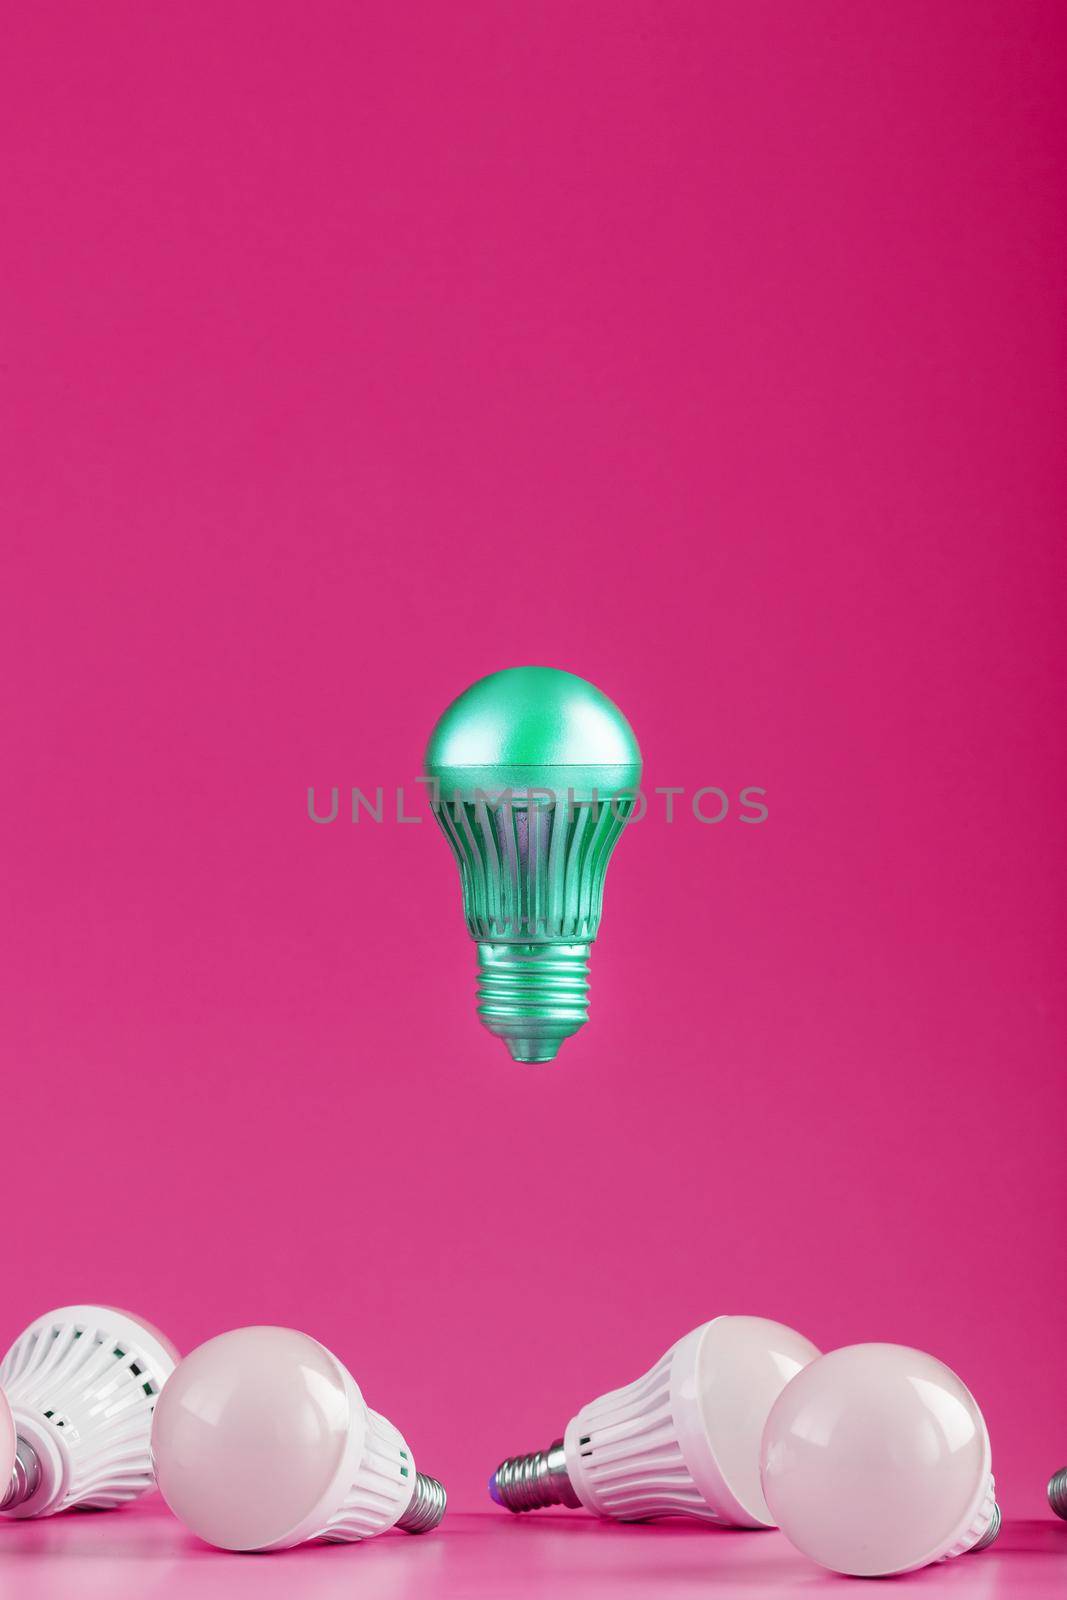 A special Light bulb hovers over simple, standard white light bulbs on a pink background. Minimalistic style with conceptual ideas. Be different